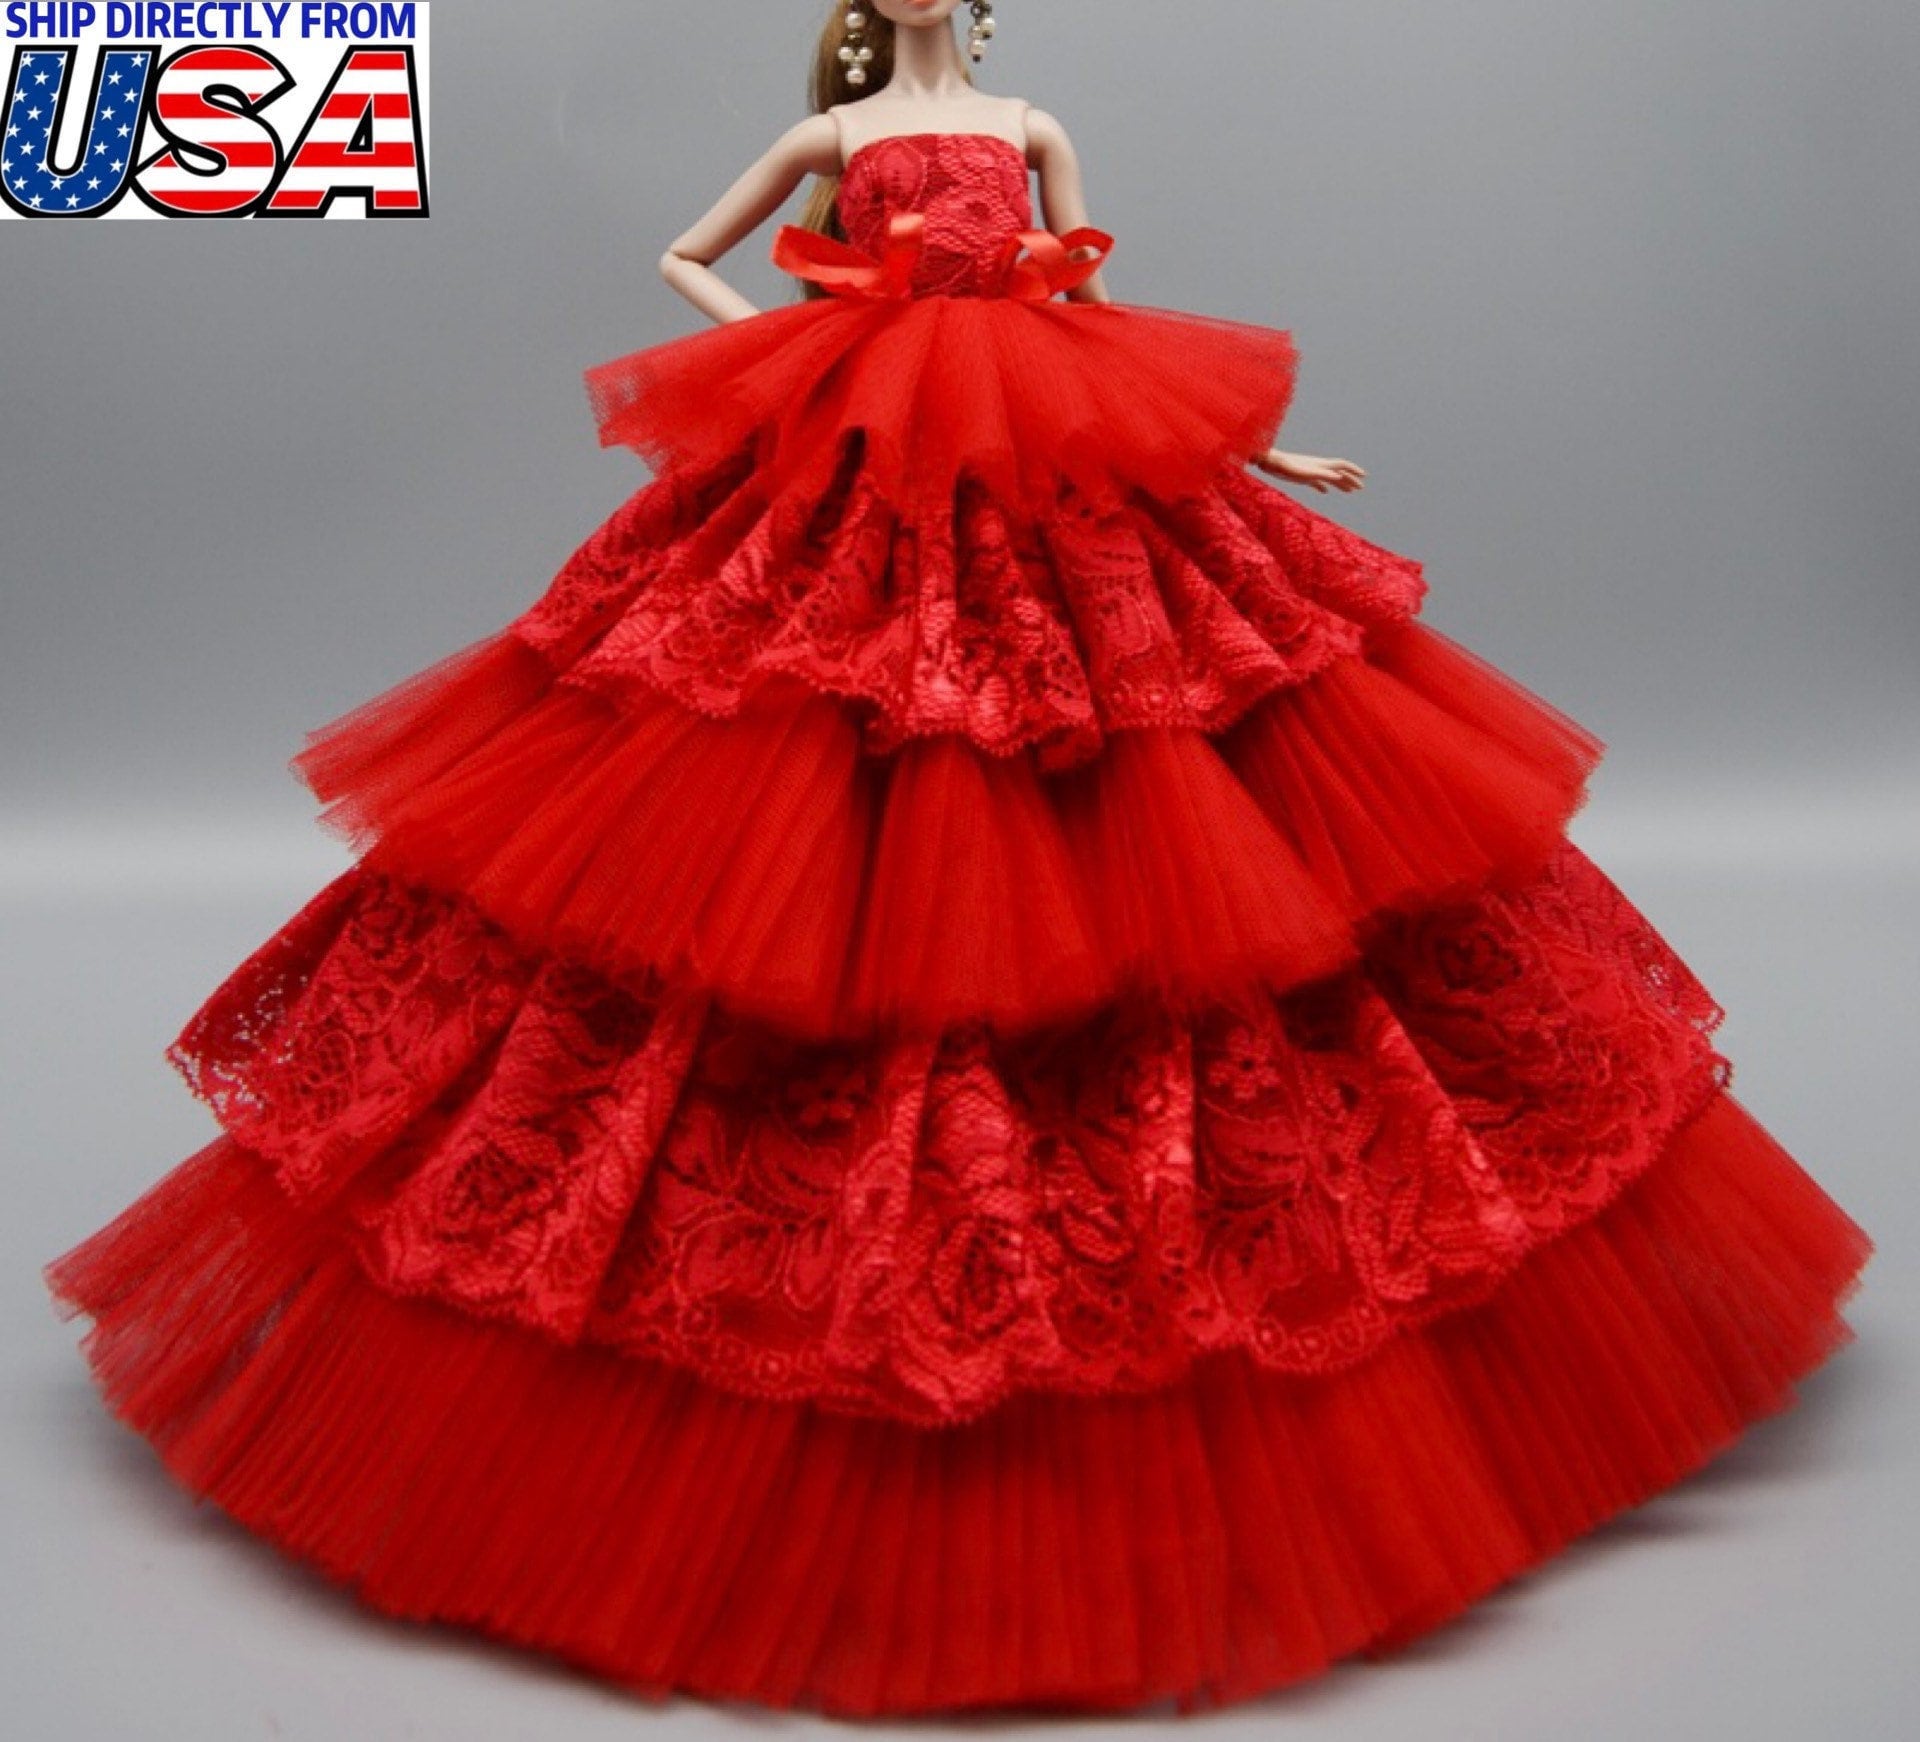 Buy Barbie by Many Frocks Red Embellished Dress for Girls Clothing Online @  Tata CLiQ